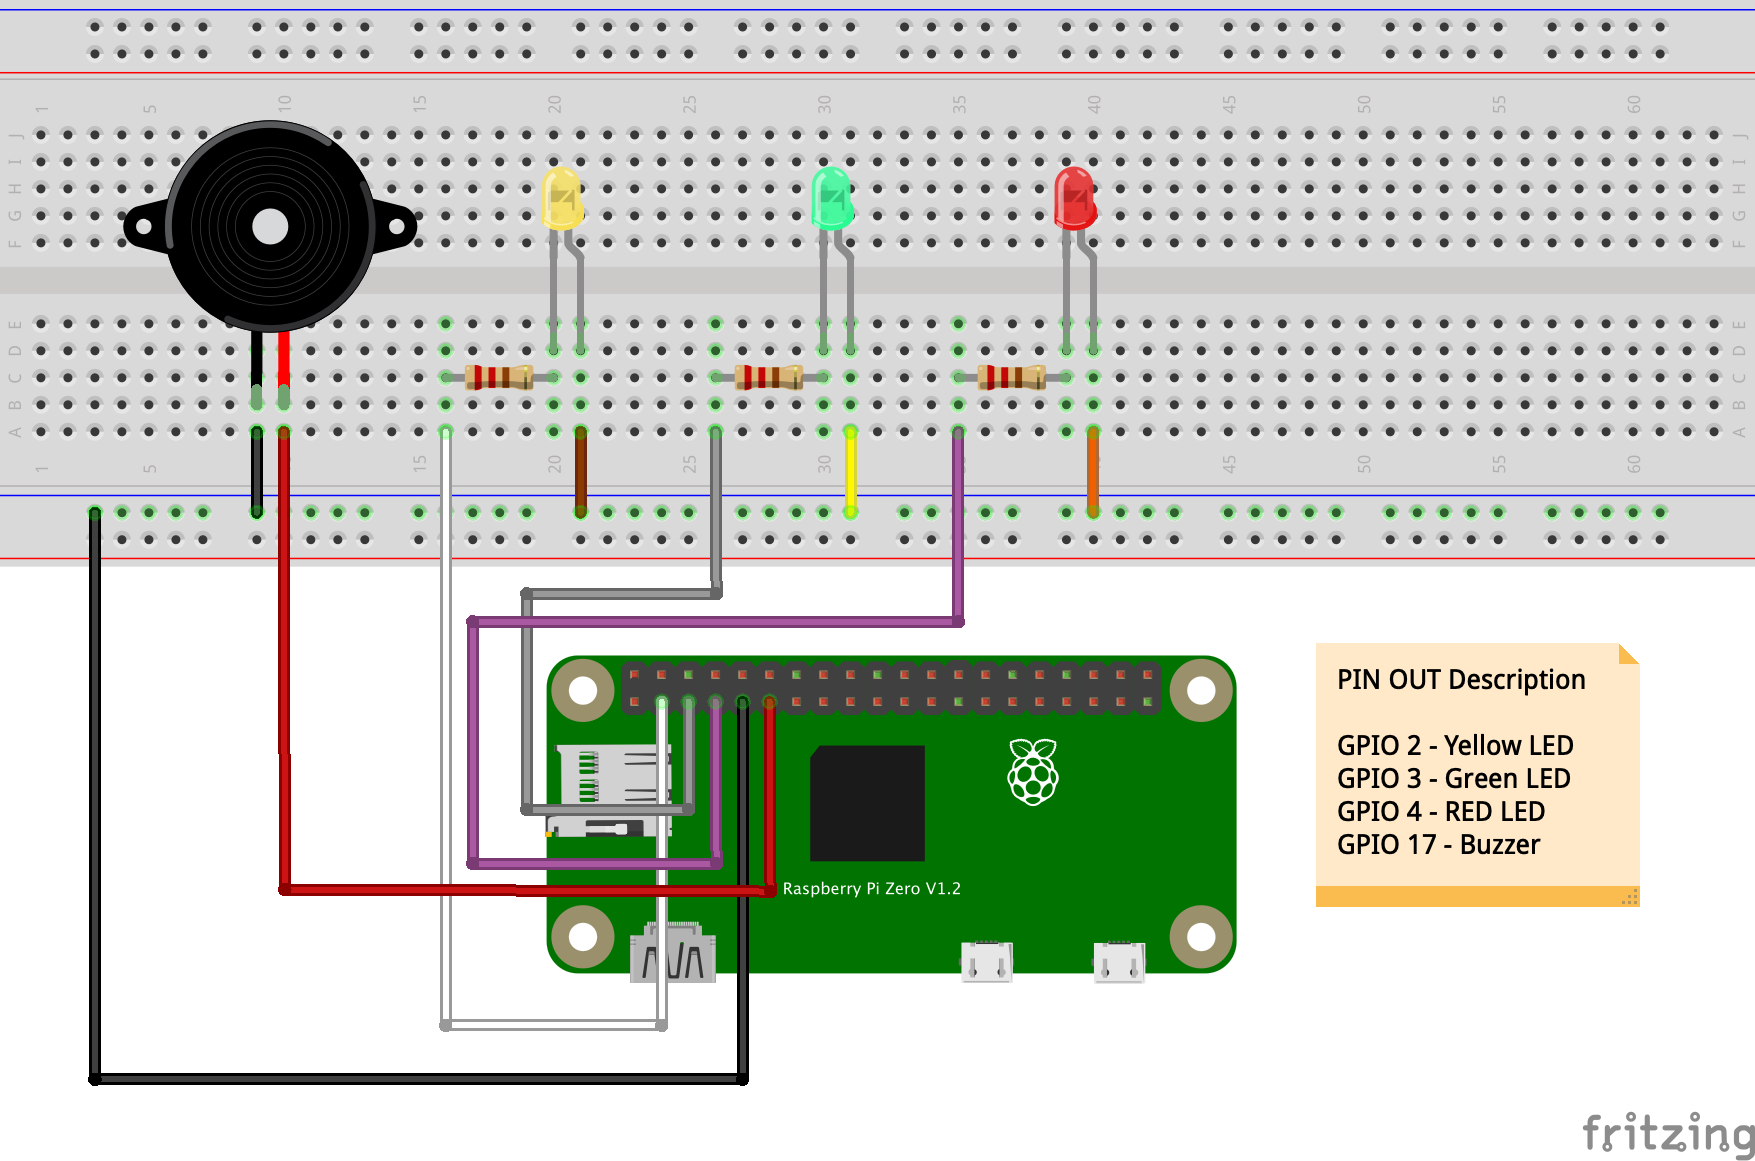 A diagram showing a speaker connected to a Raspberry Pi